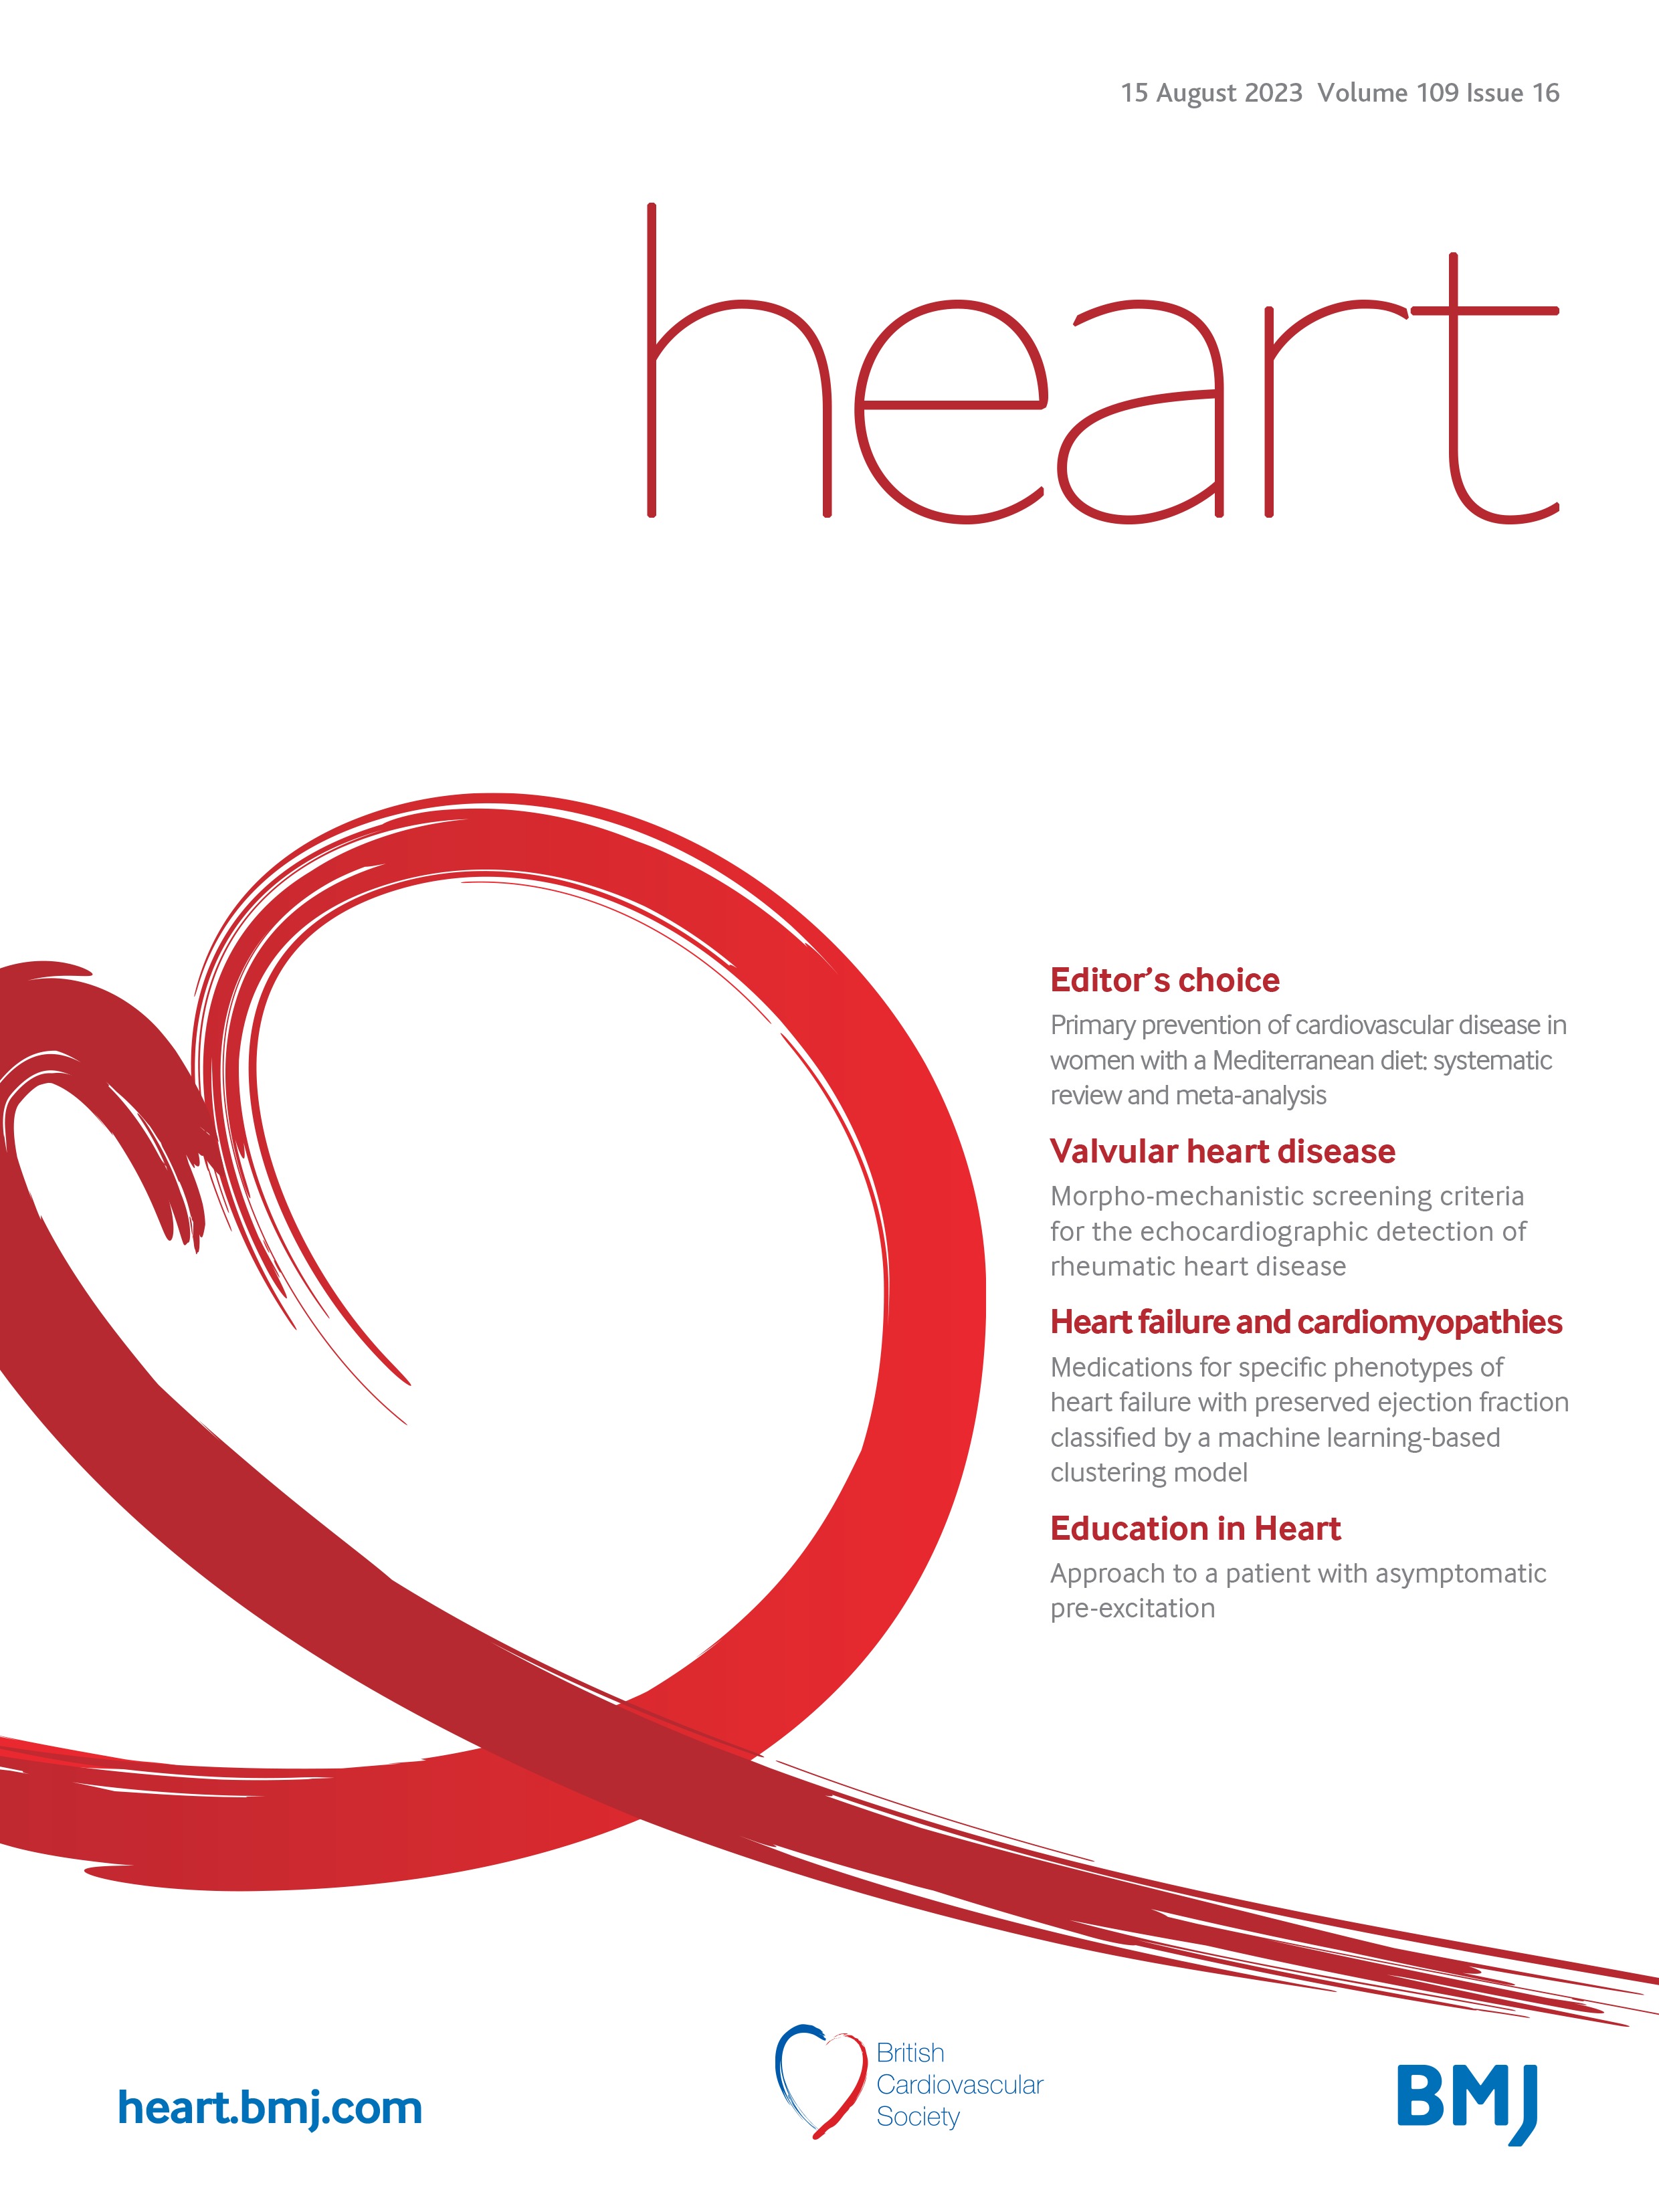 Medications for specific phenotypes of heart failure with preserved ejection fraction classified by a machine learning-based clustering model